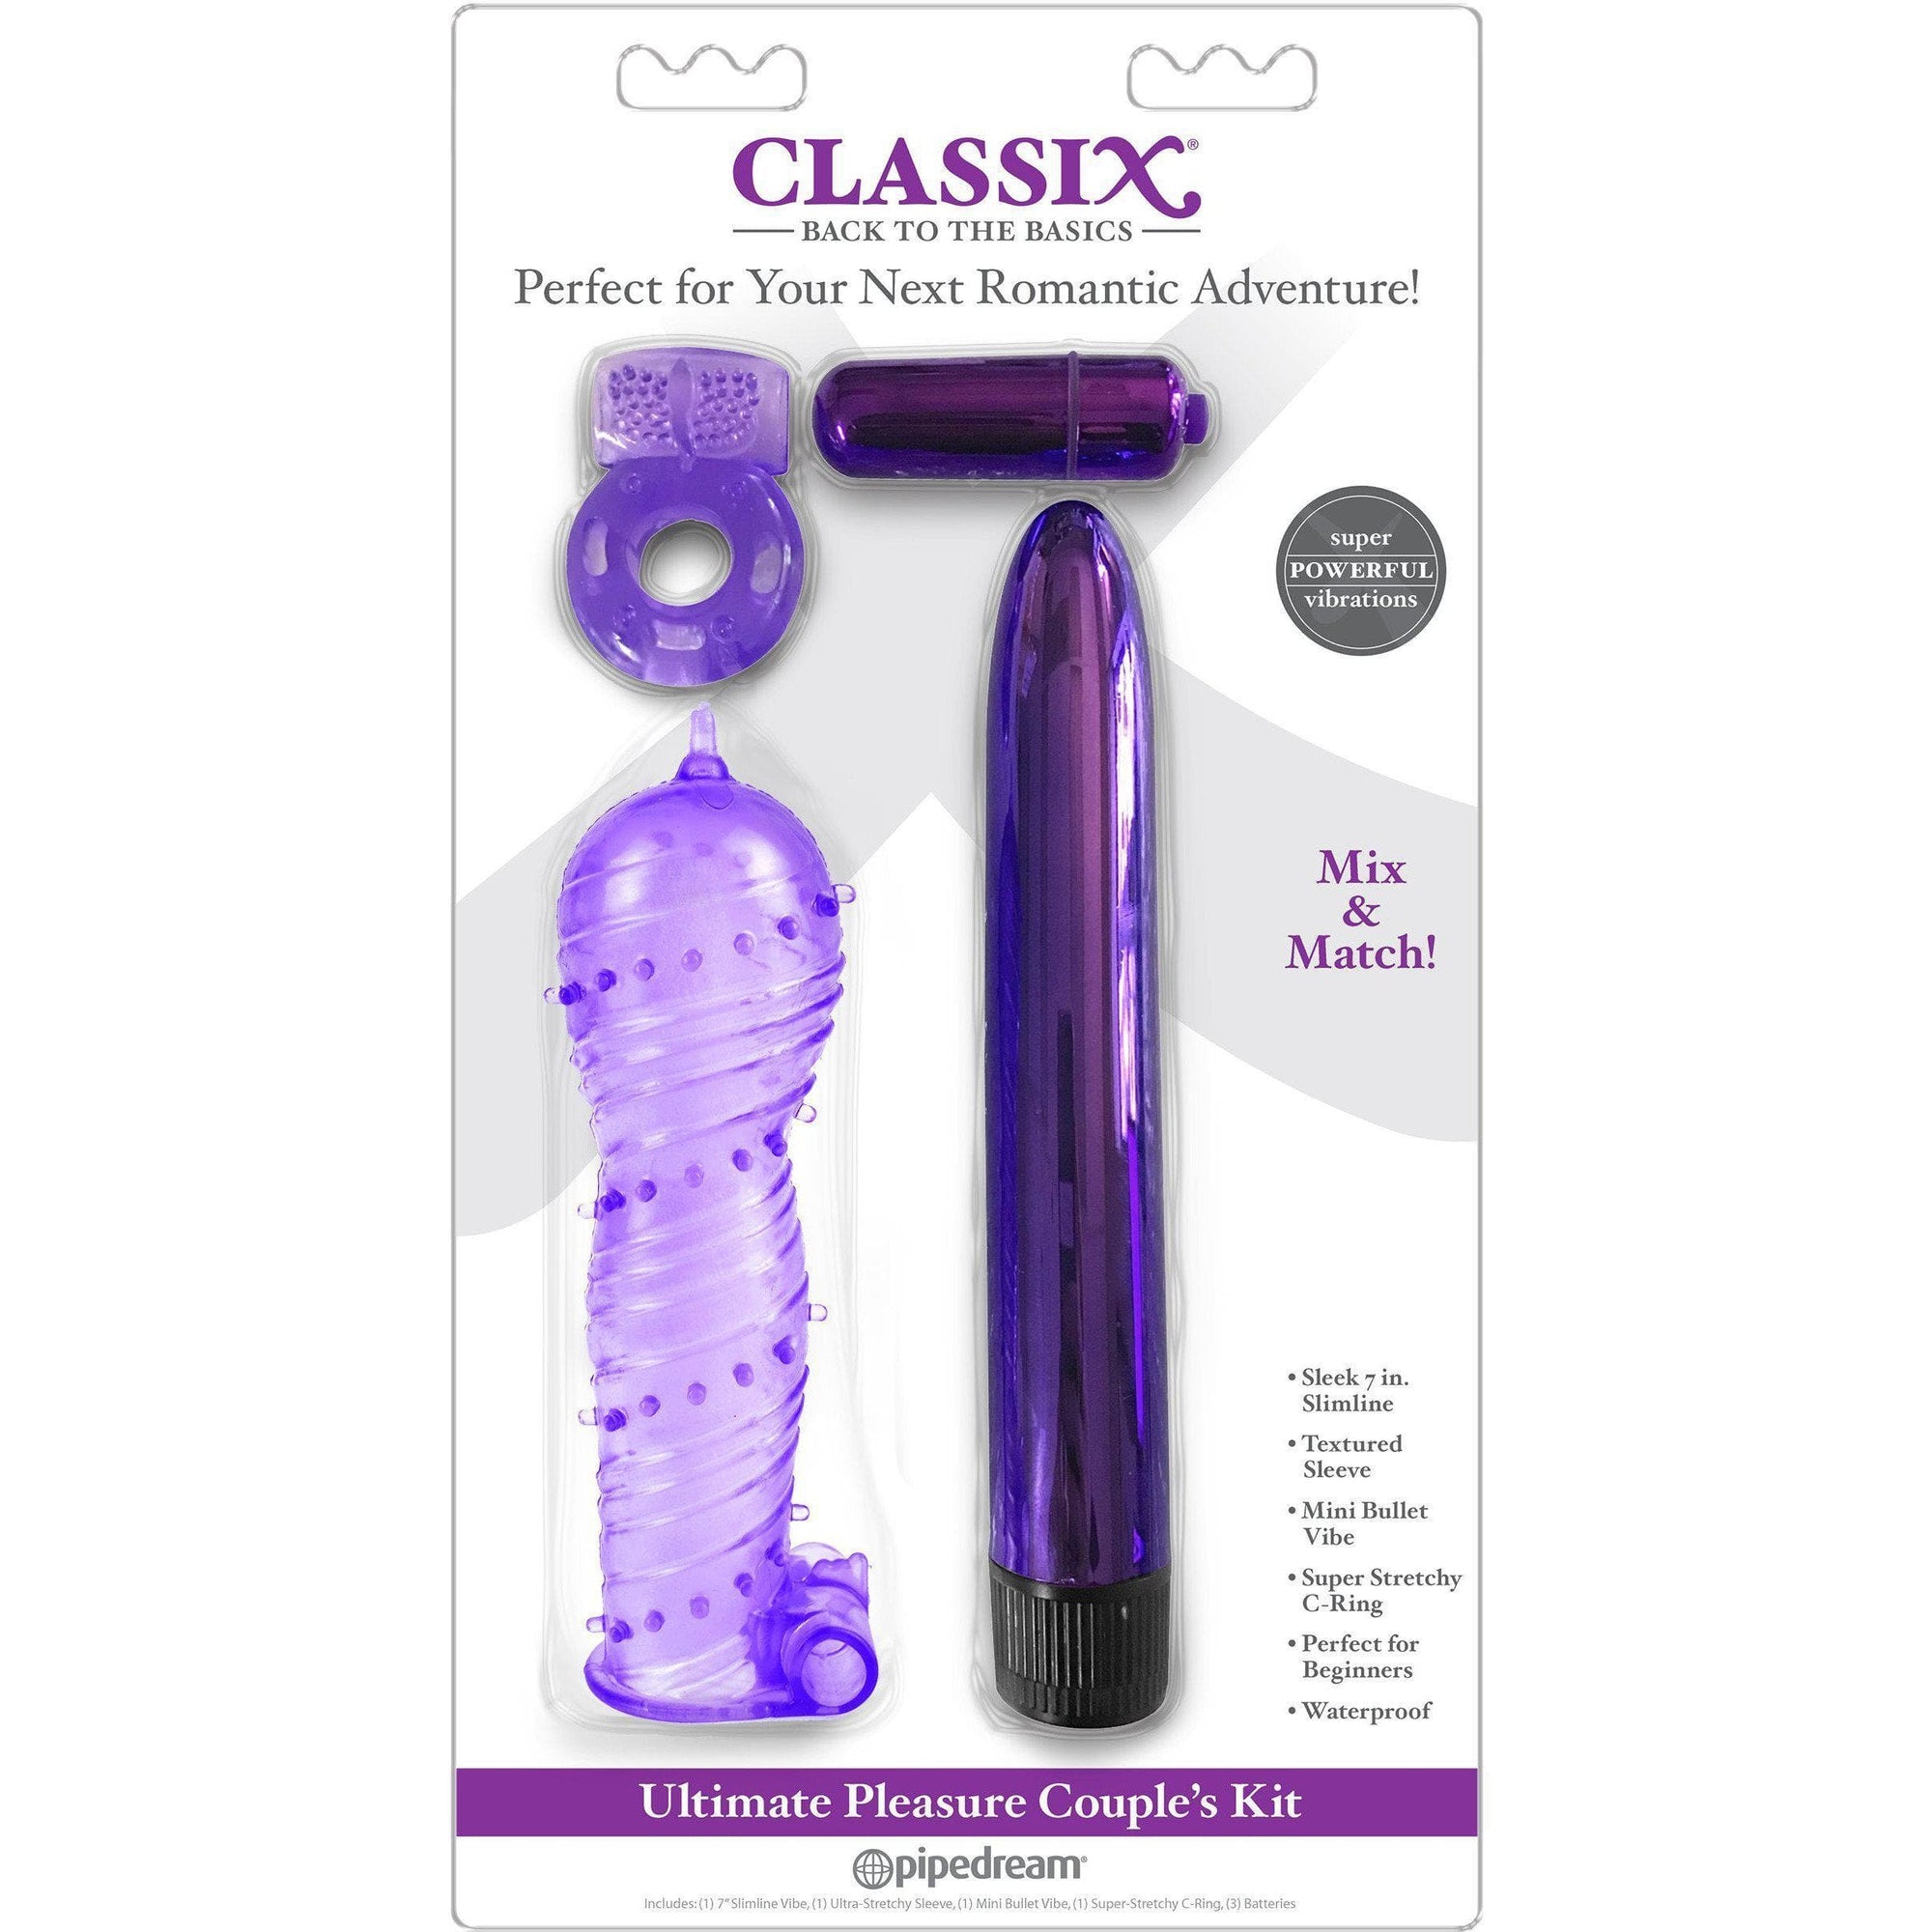 Classix Ultimate Pleasure Couples Kit with 4 Classic Favorites - Romantic Blessings